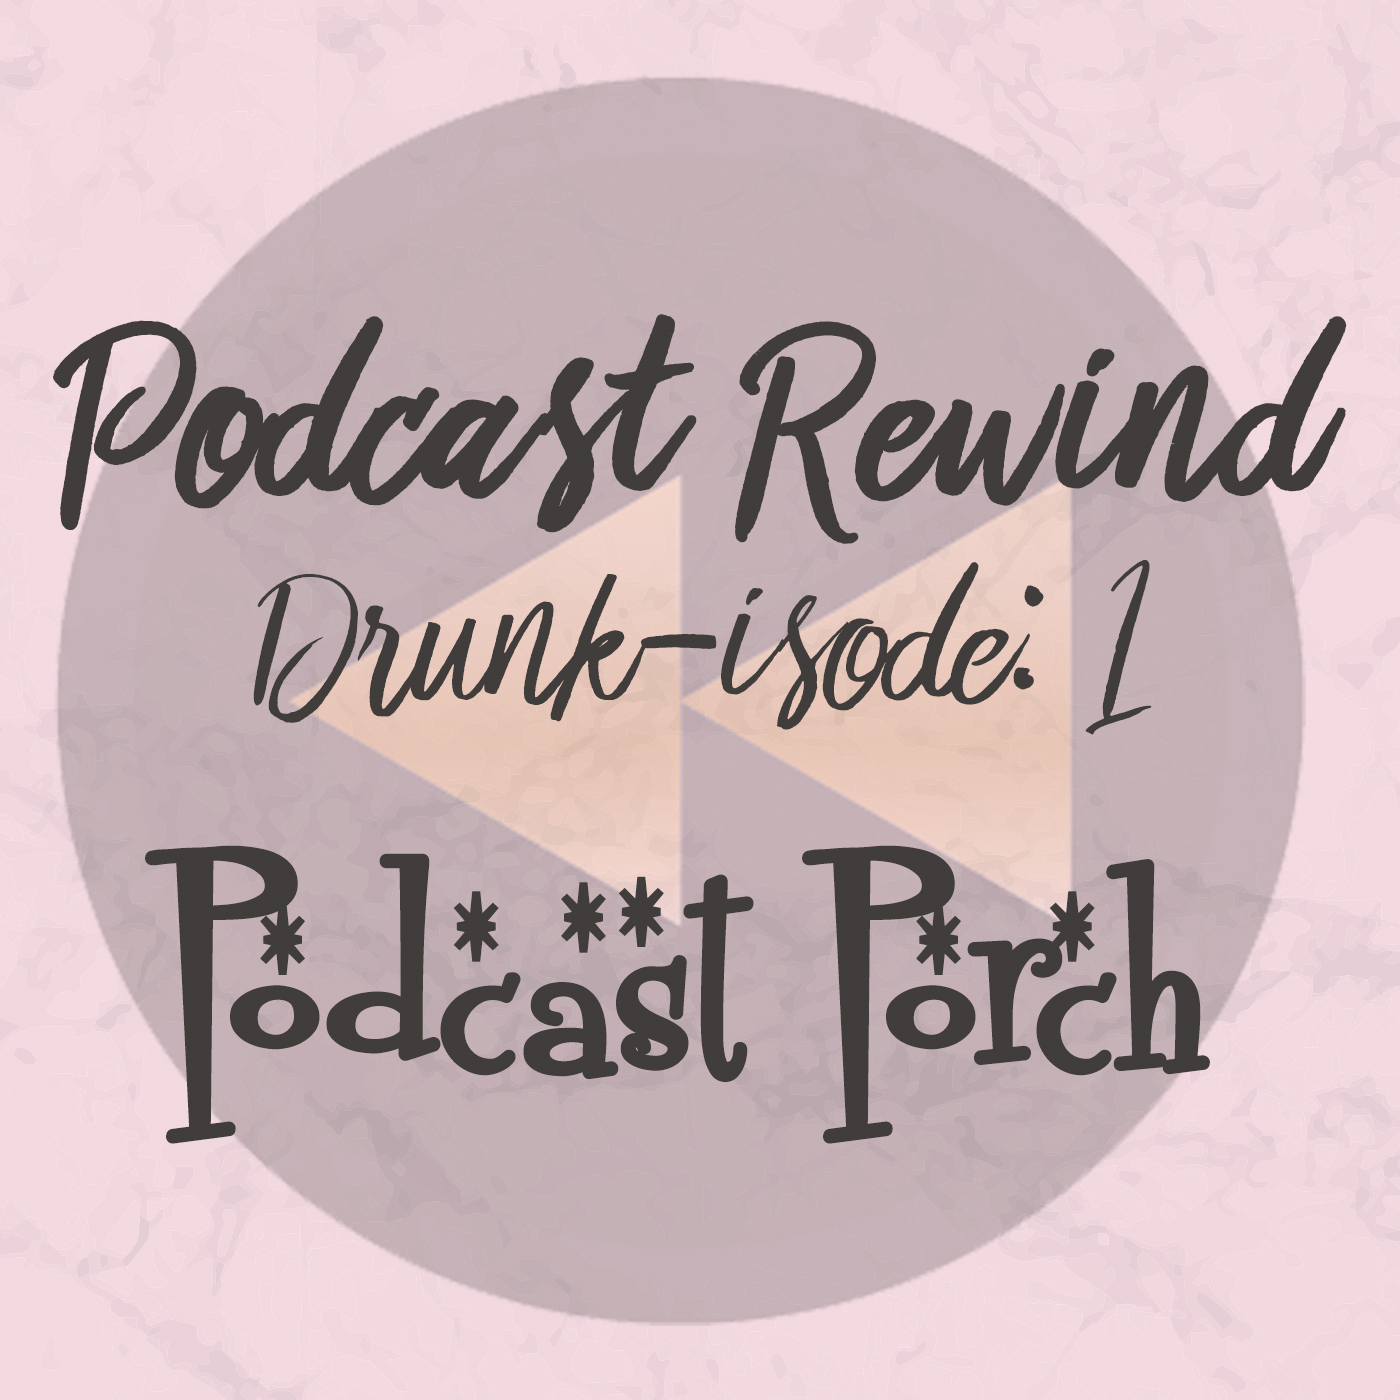 Drunk-isode 1: Podcast Porch